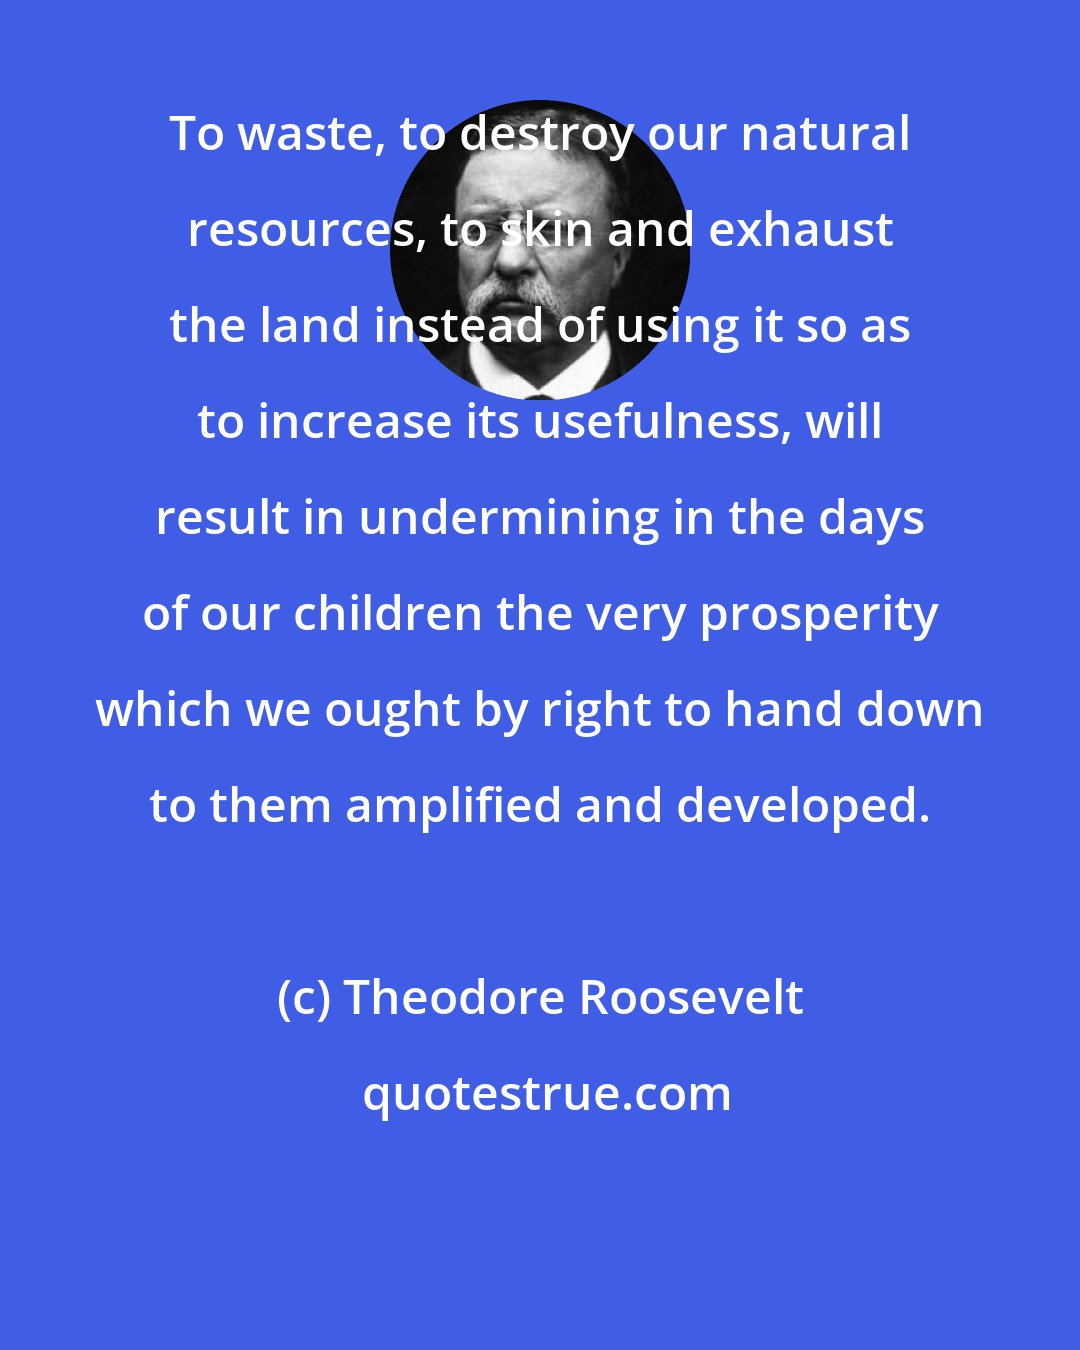 Theodore Roosevelt: To waste, to destroy our natural resources, to skin and exhaust the land instead of using it so as to increase its usefulness, will result in undermining in the days of our children the very prosperity which we ought by right to hand down to them amplified and developed.